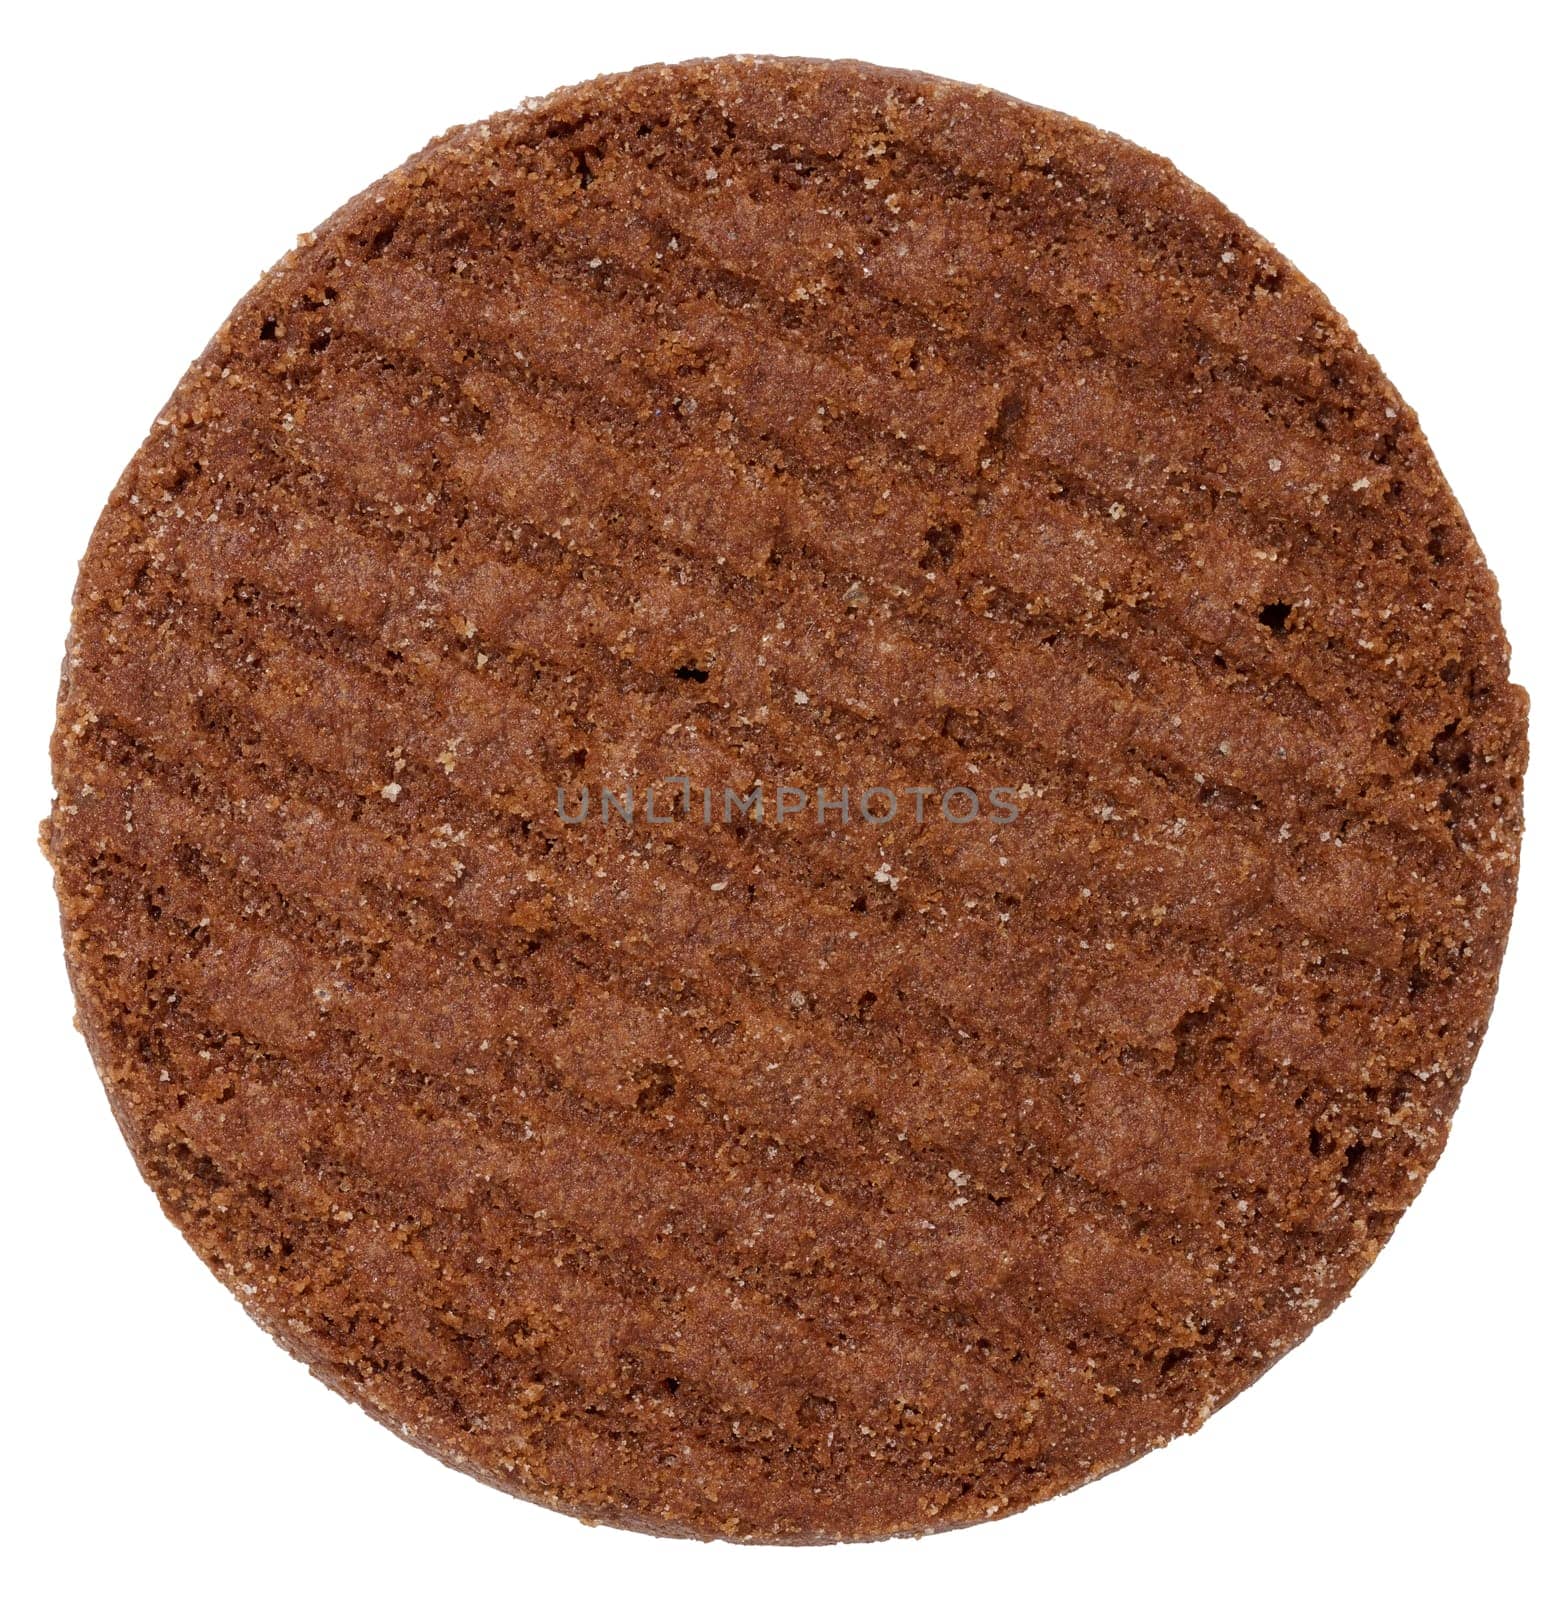 Round chocolate cookies on white isolated background by ndanko